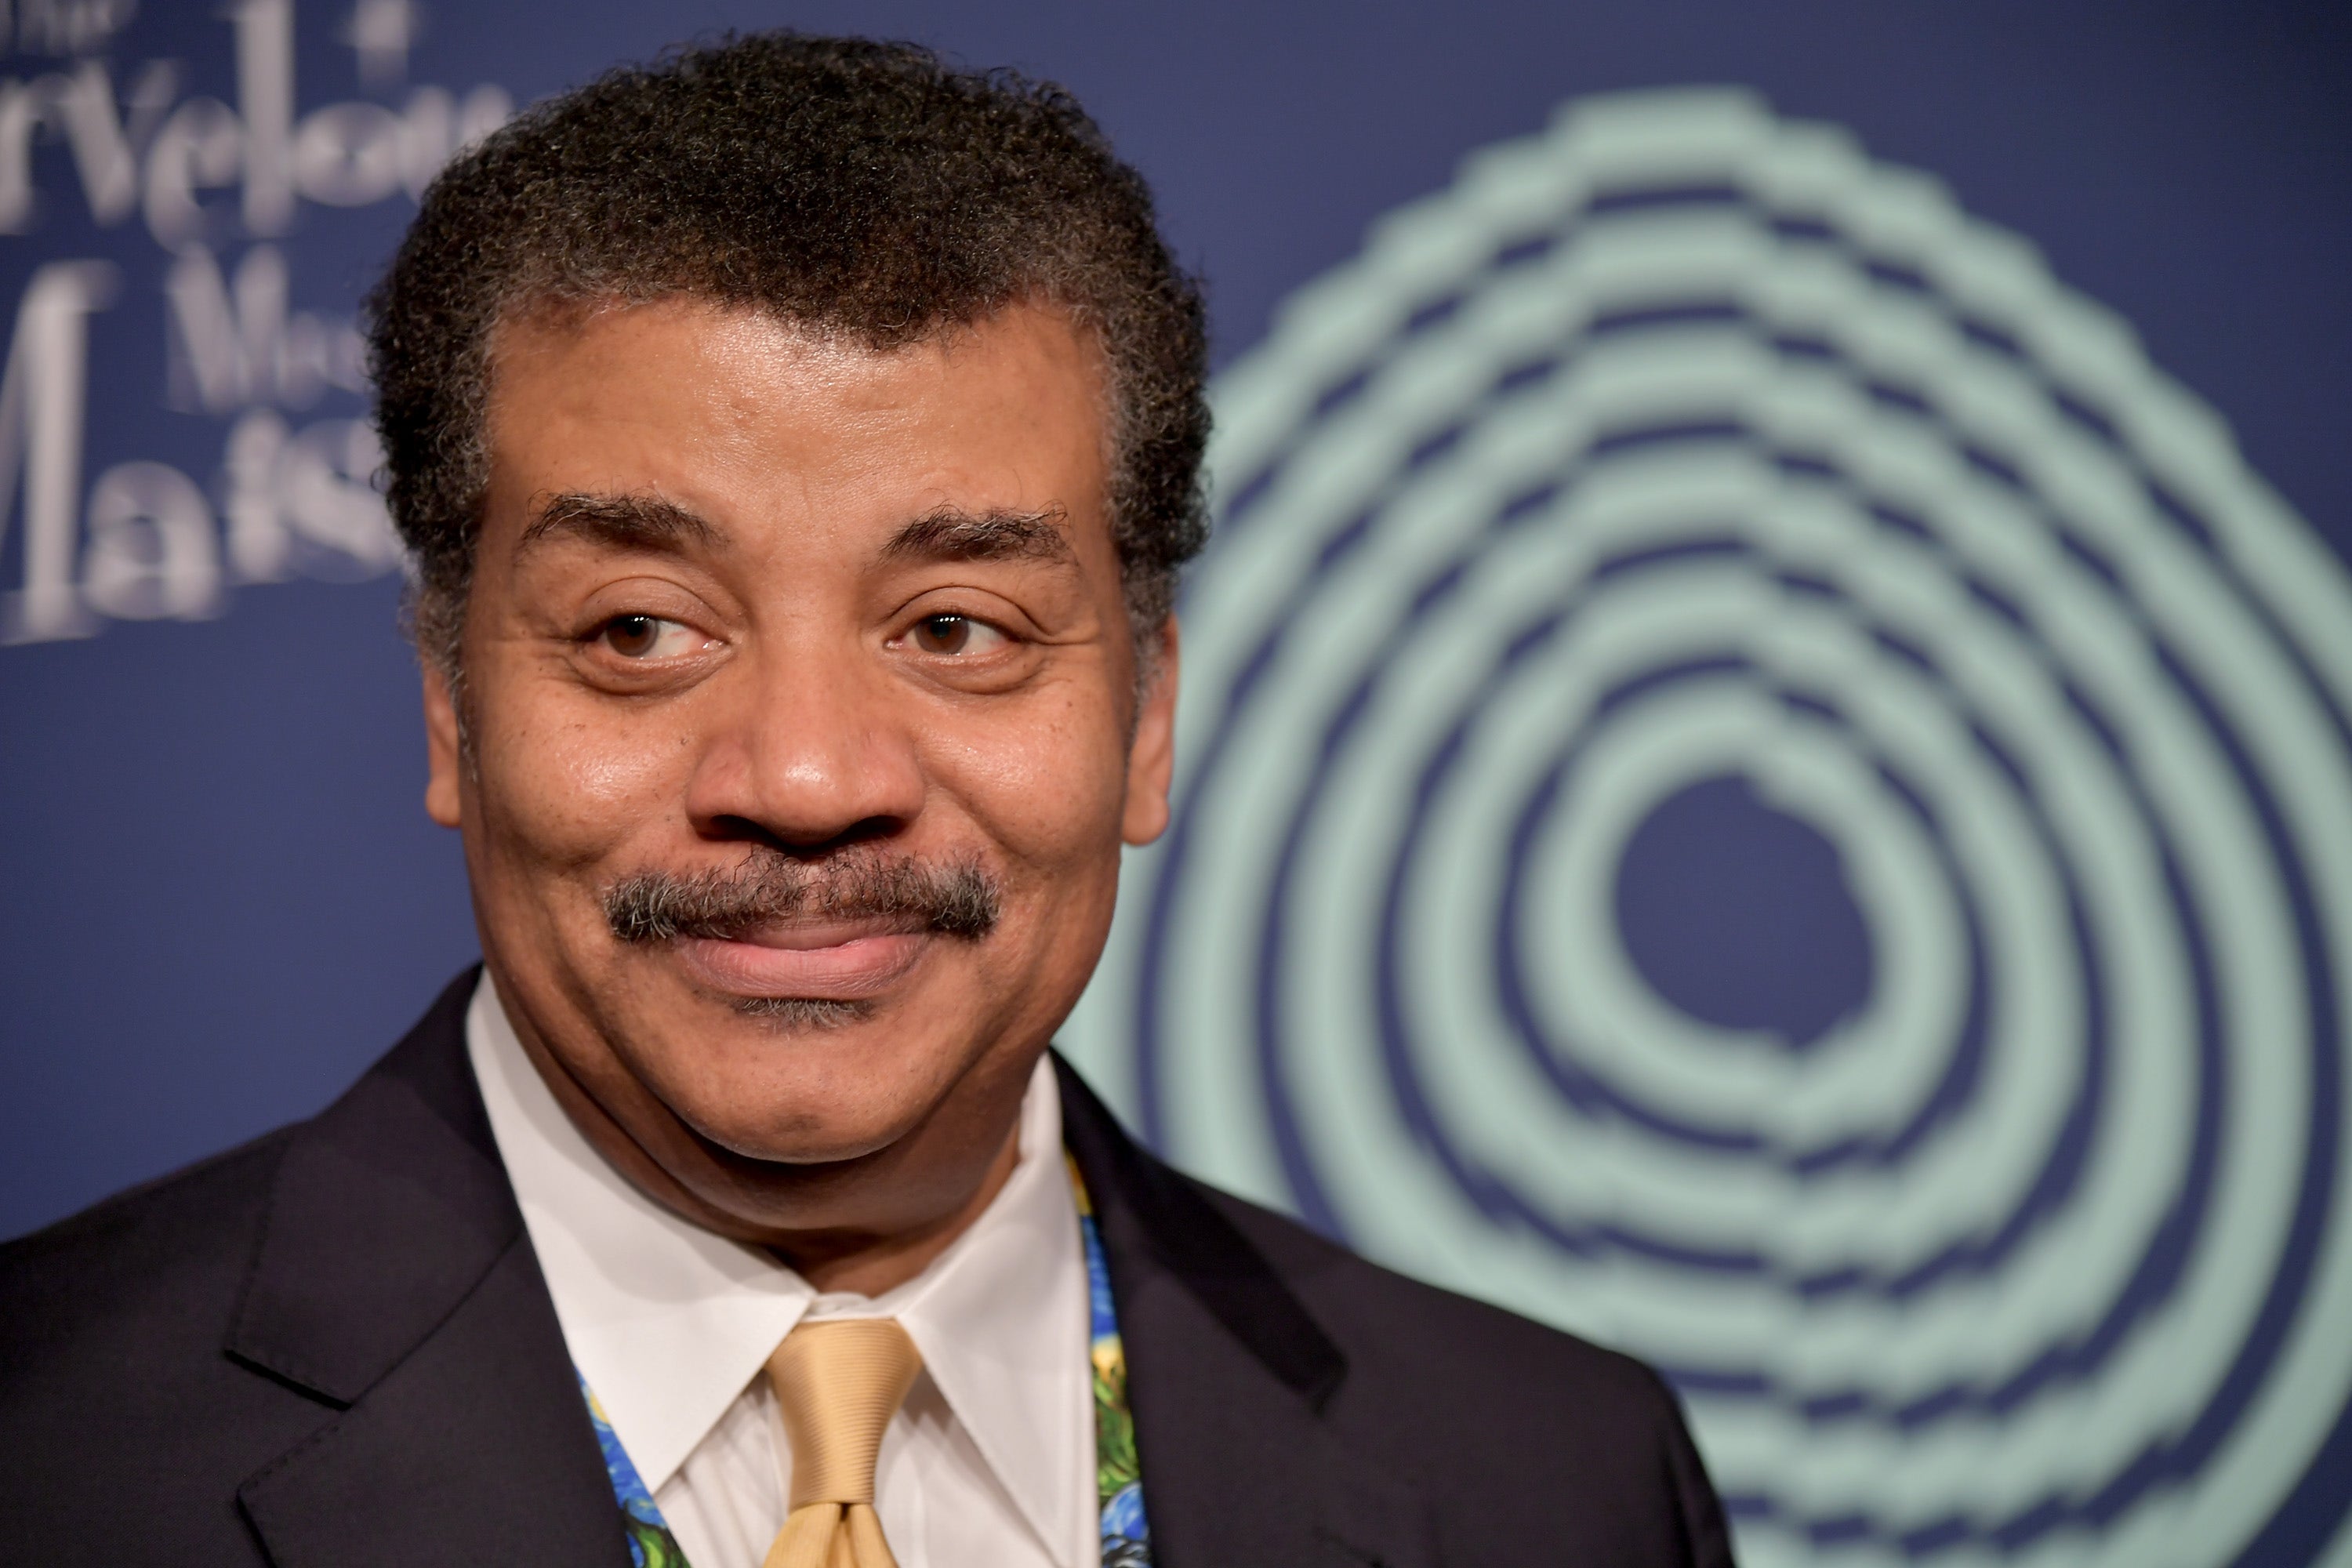 Astrophysicist Neil deGrasse Tyson offers optimistic view of AI, 'long awaited force' of 'reform'